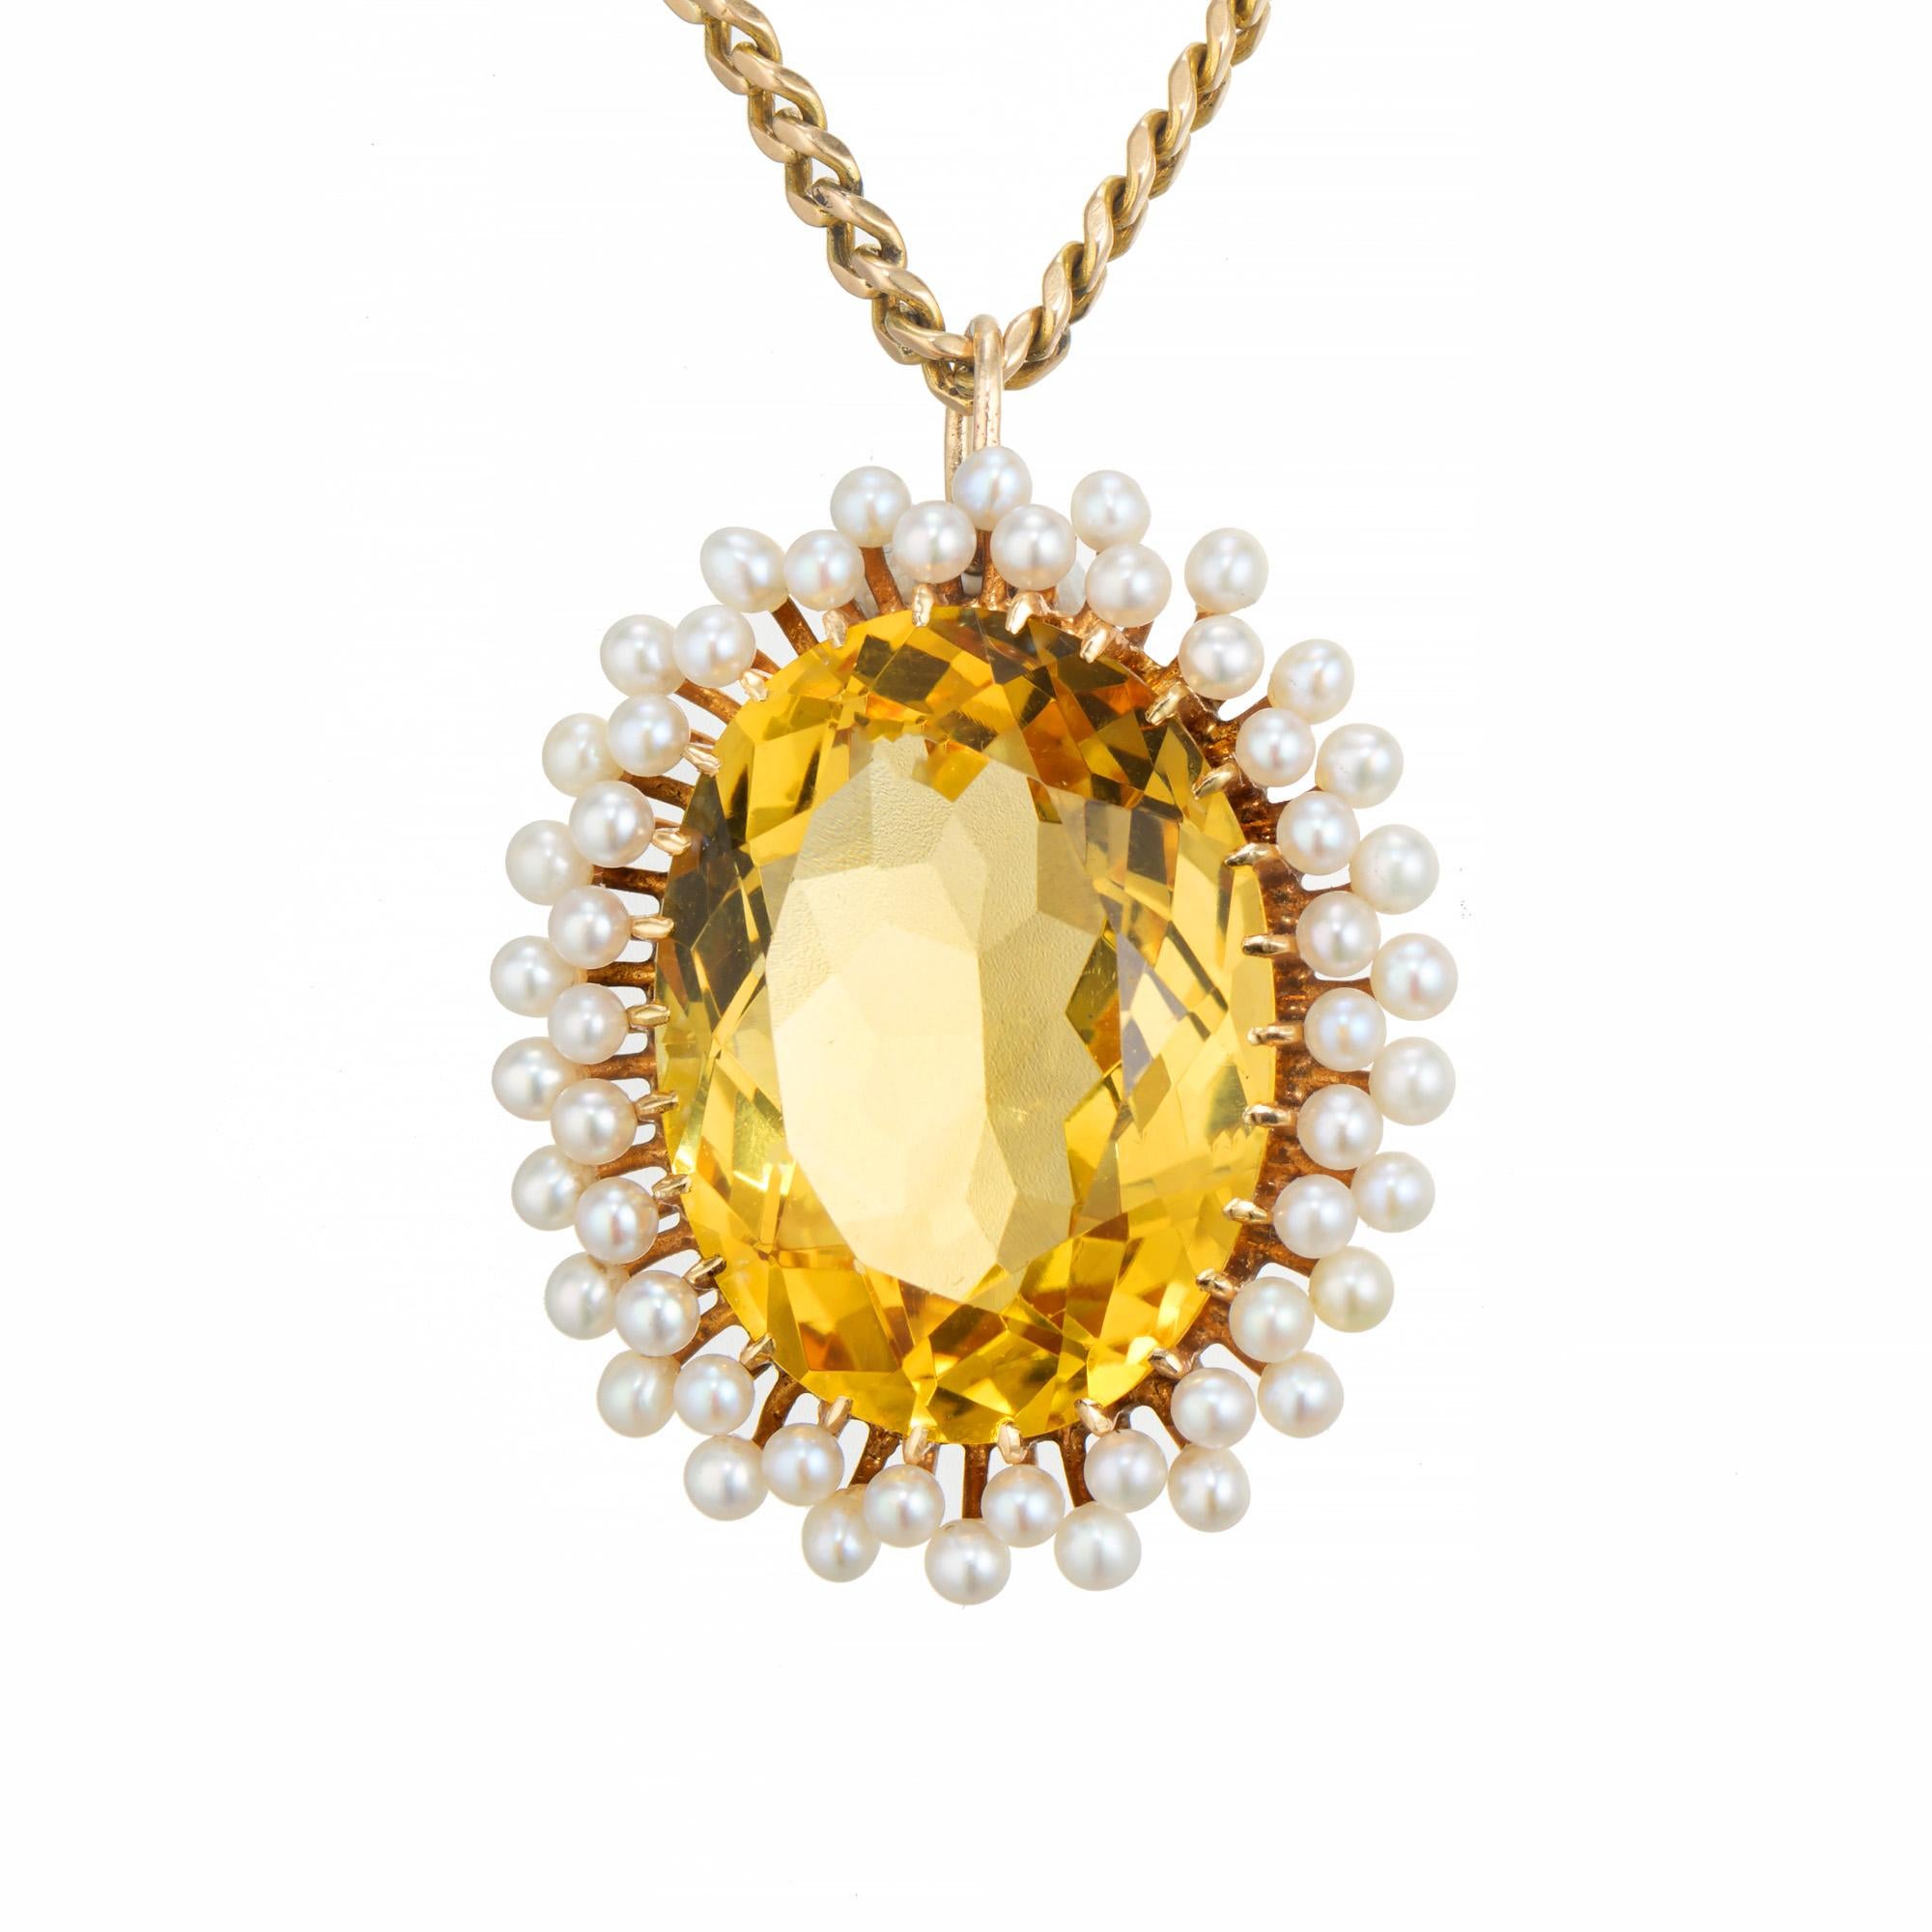 1900's large citrine and pearl pendant necklace. Beautiful 14.00ct oval citrine set in a 14k yellow gold setting with a halo of 52 white/crème cultured pearls. This turn of the century, spectacular natural golden yellow oval  citrine is accented